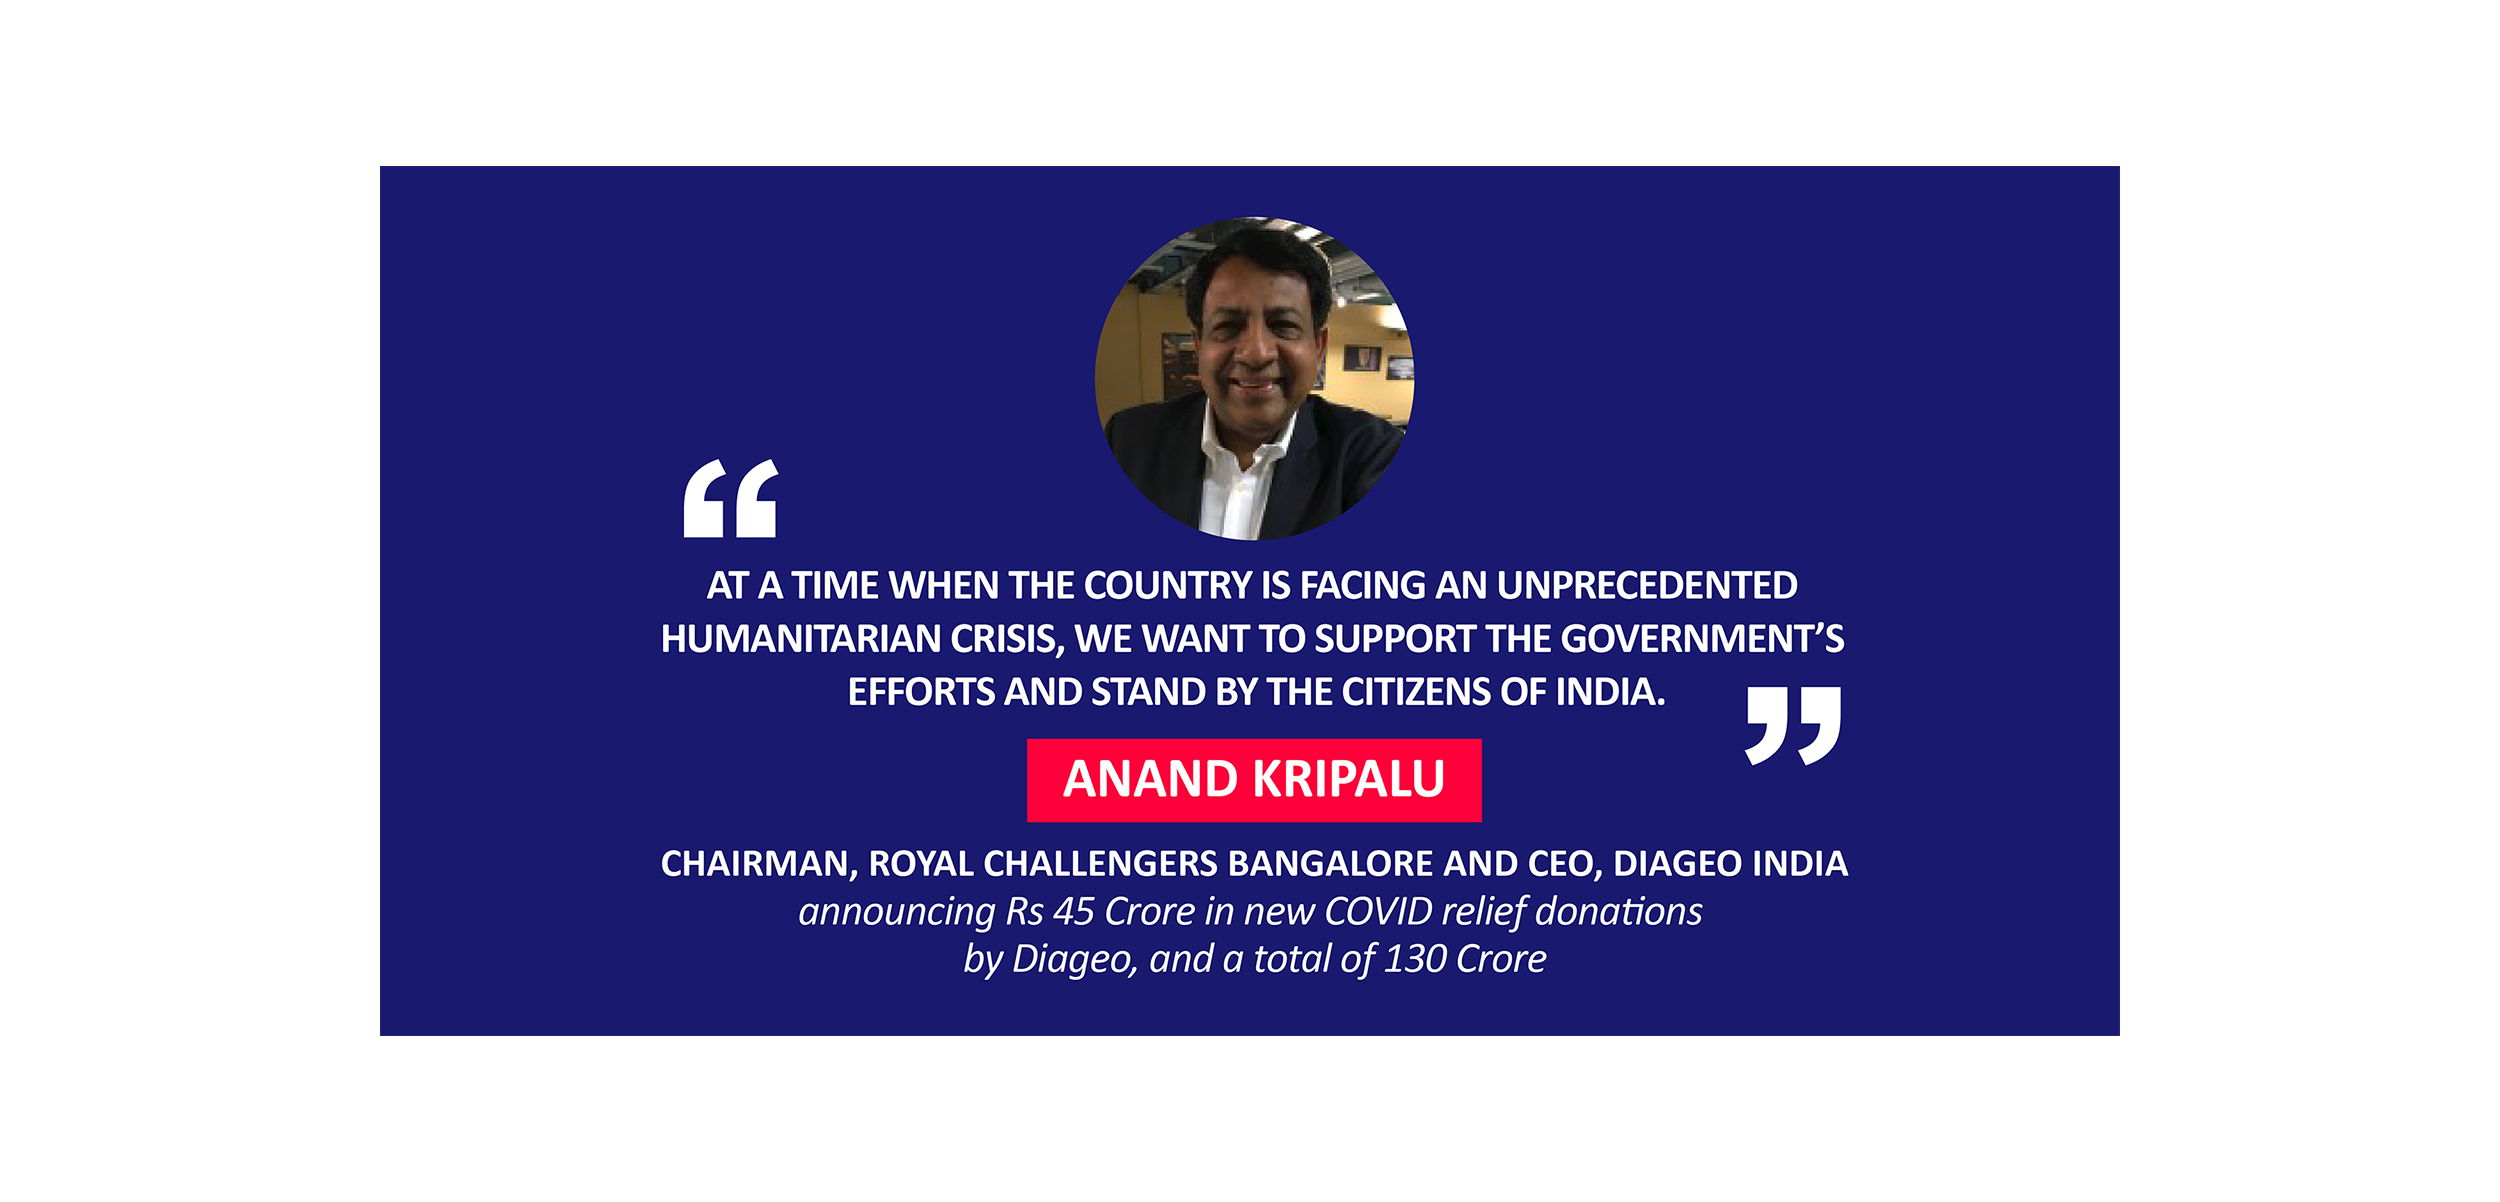 Anand Kripalu, Chairman, Royal Challengers Bangalore and CEO, Diageo India announcing Rs 45 Crore in new COVID relief donations by Diageo, and a total of 130 Crore